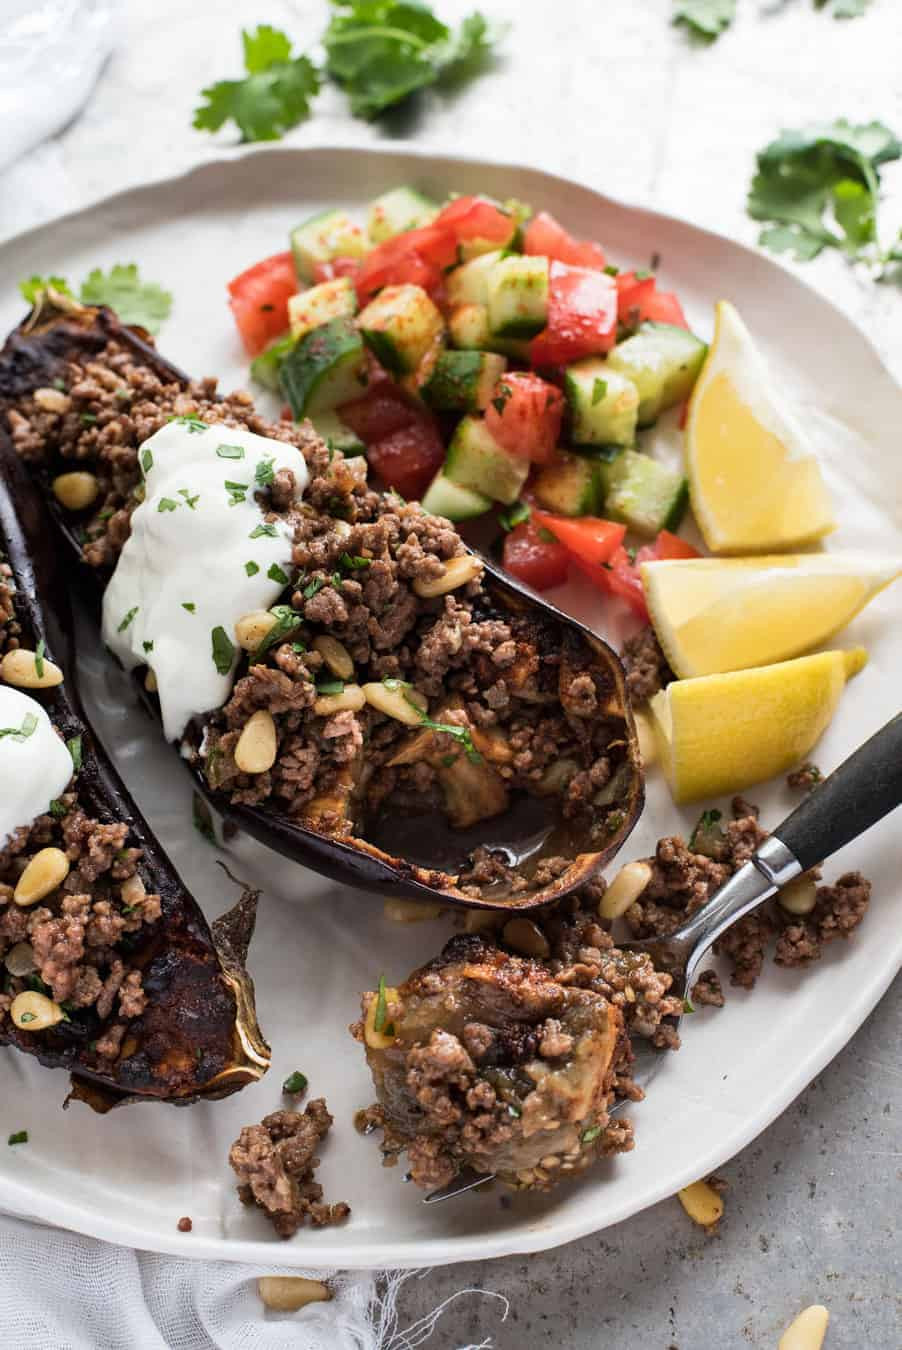 Middle Eastern Ground Beef Recipe
 Moroccan Baked Eggplant with Beef